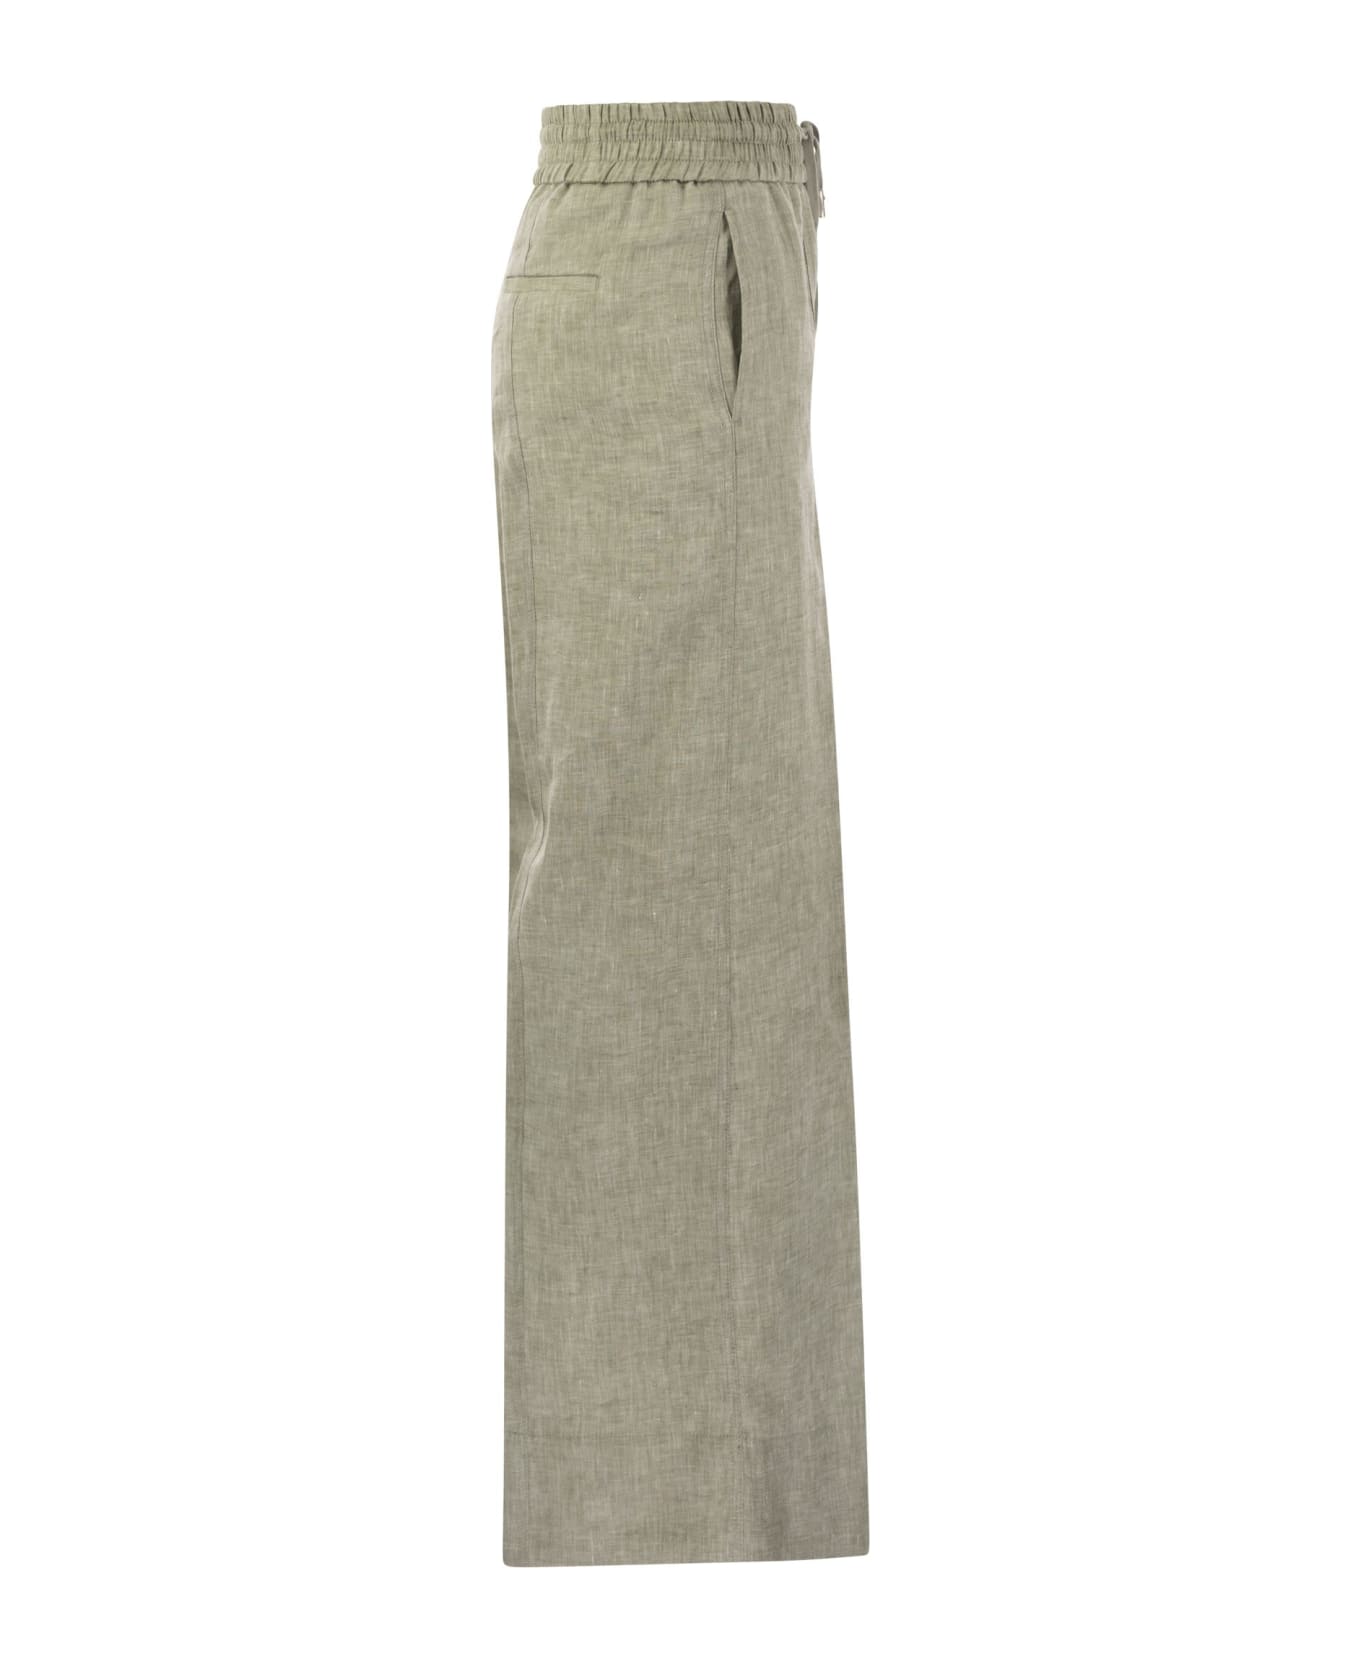 Peserico Loose-fitting Trousers In Lightweight Pure Linen Canvas - Green ボトムス